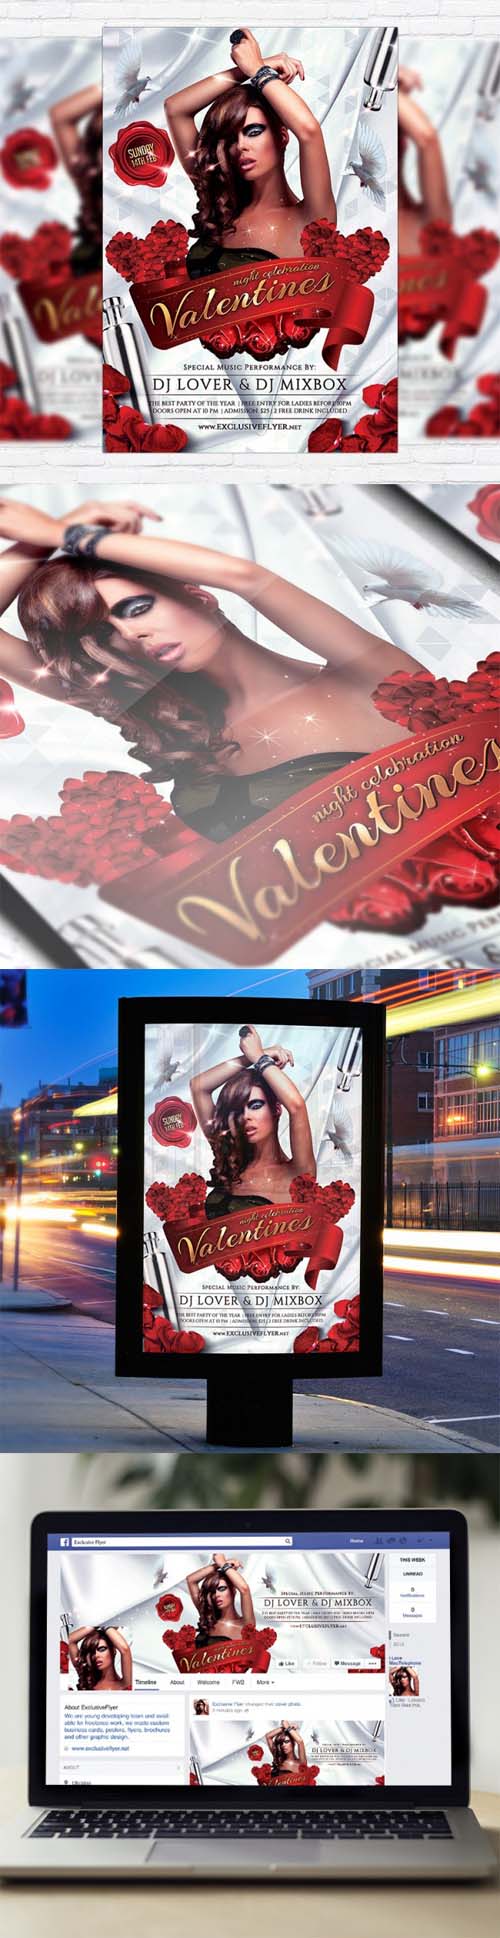 Flyer Template - Valentines Night Celebration + Facebook Cover